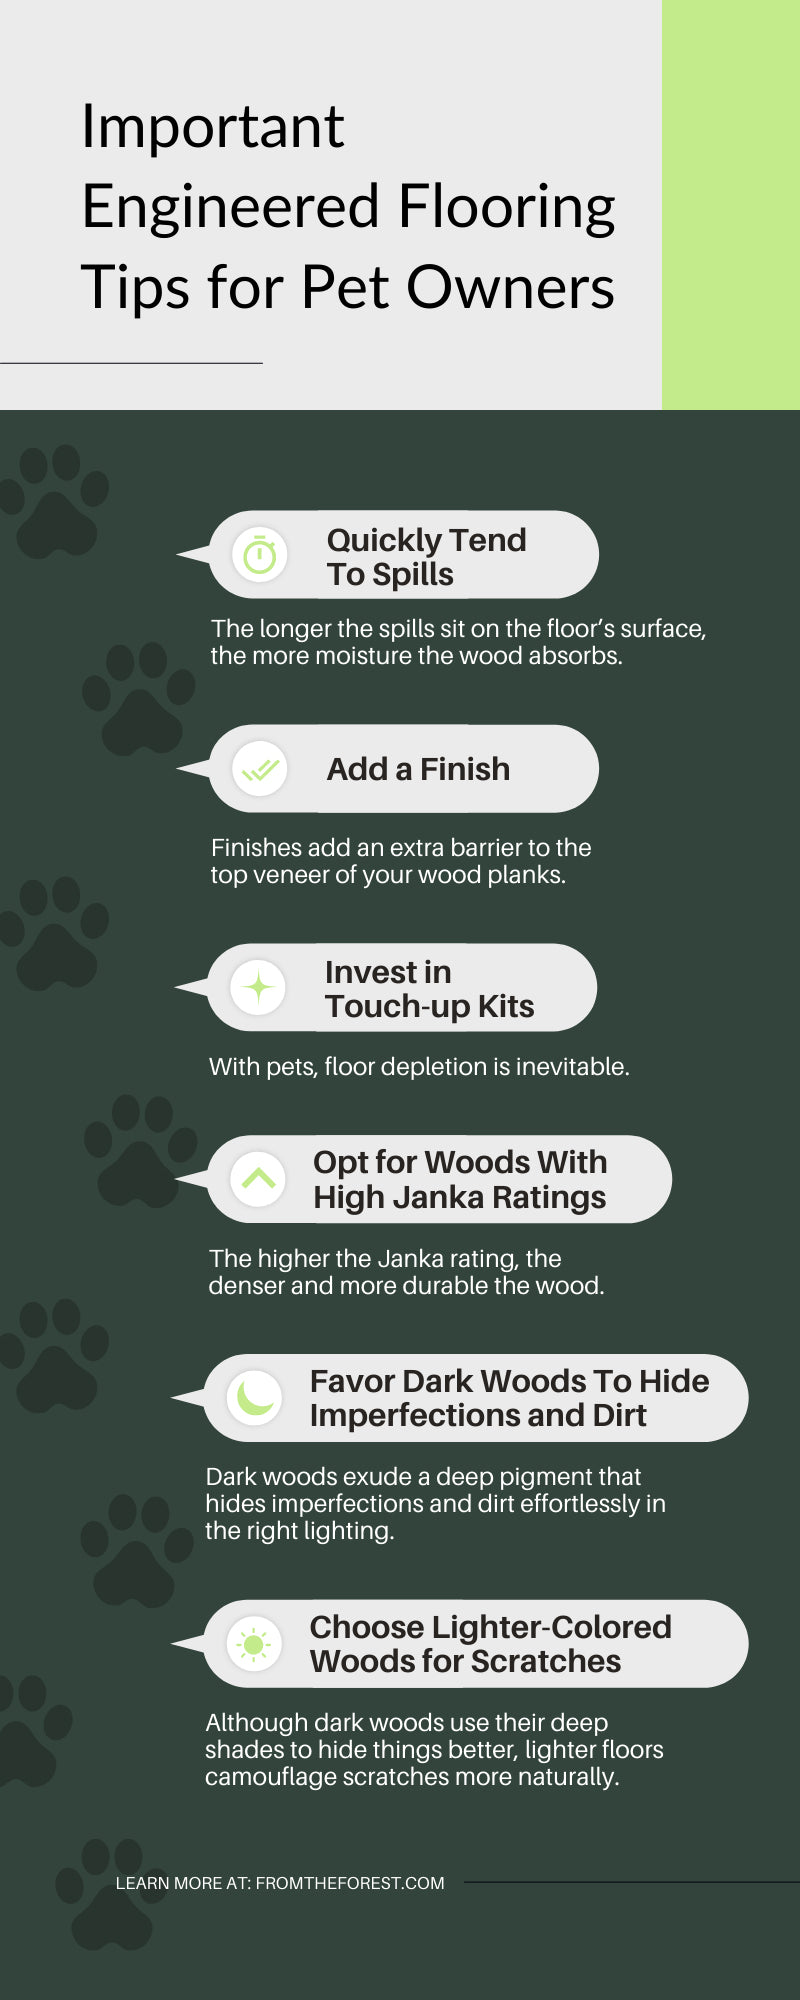 10 Important Engineered Flooring Tips for Pet Owners